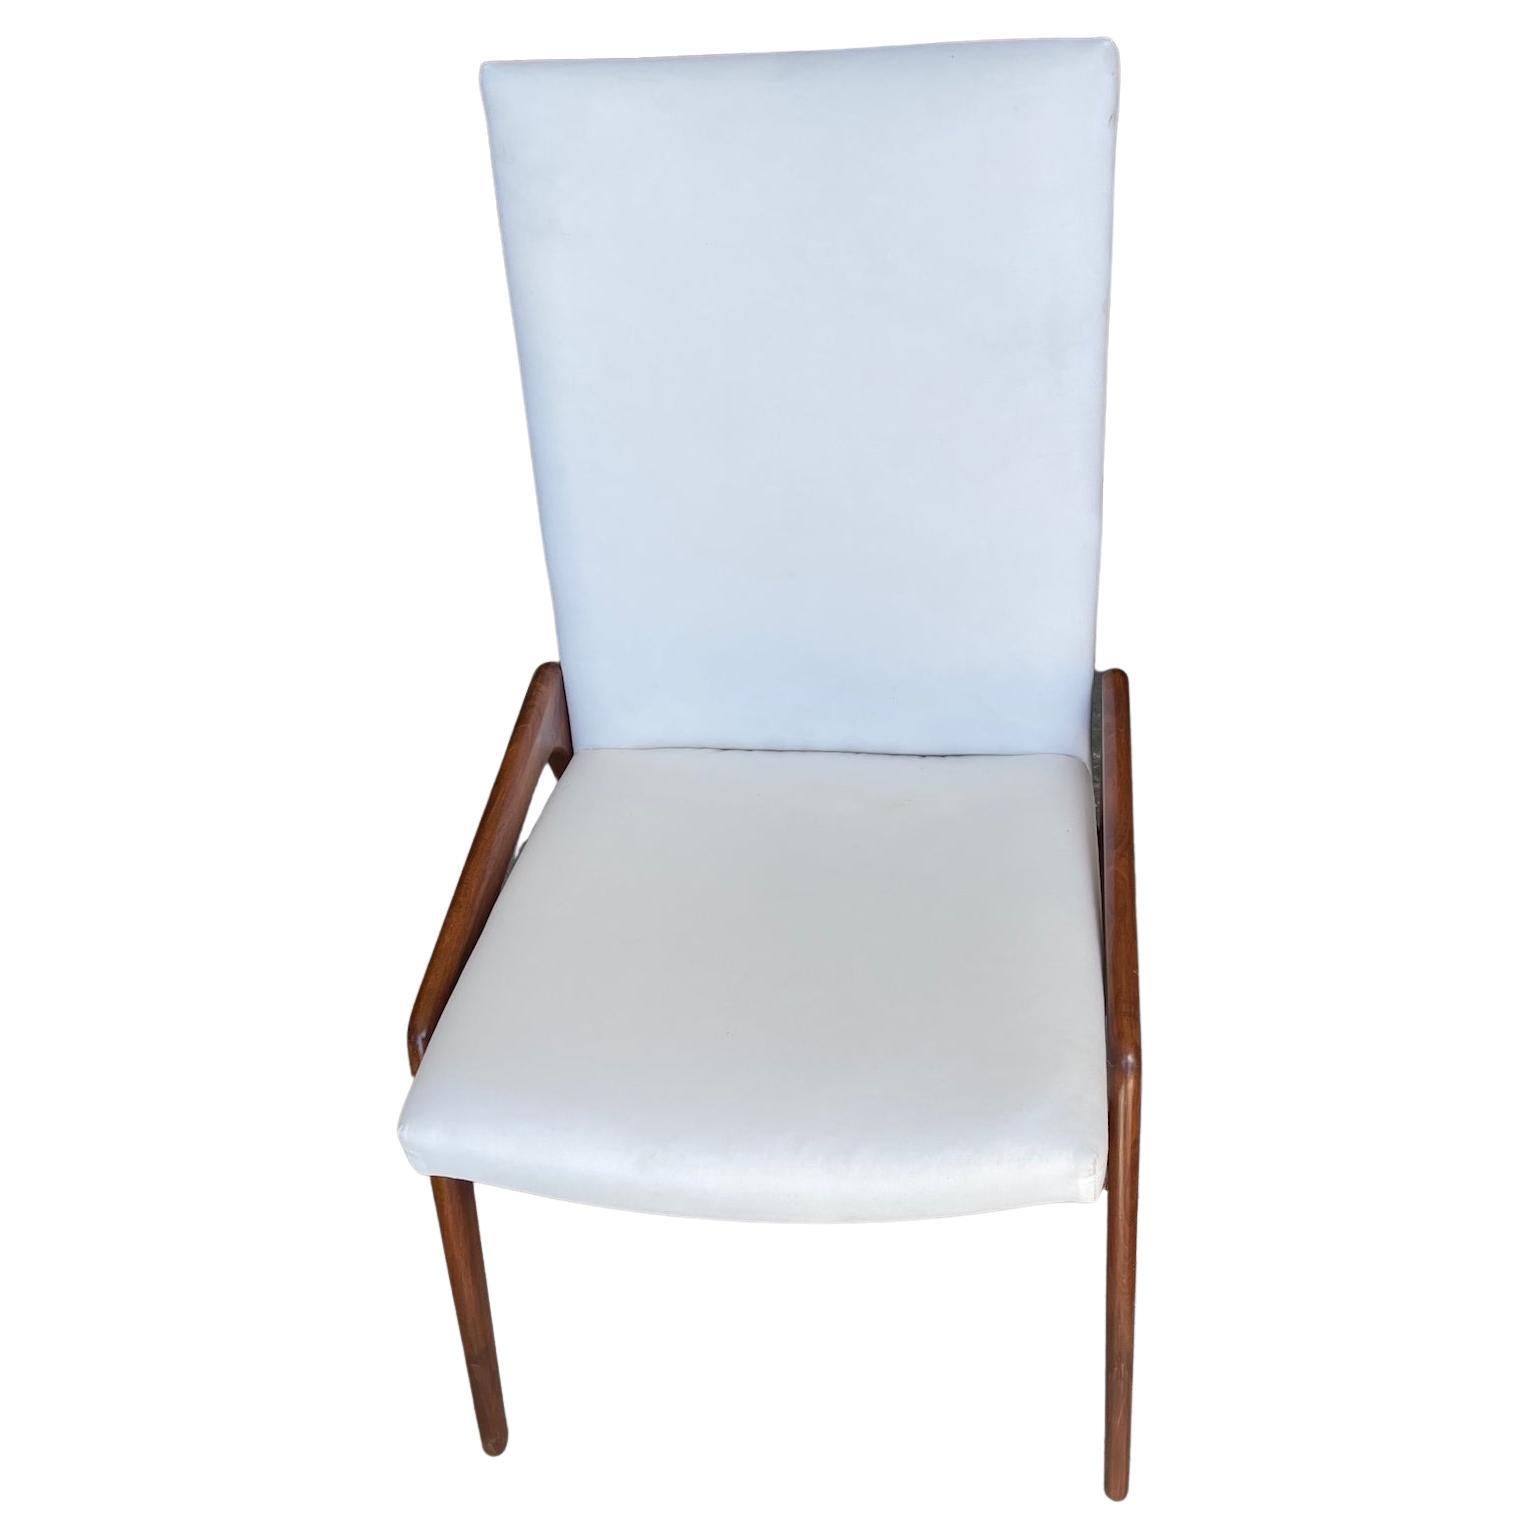 Reproduction Danish Style Alderwood Dining Chairs Upholstered